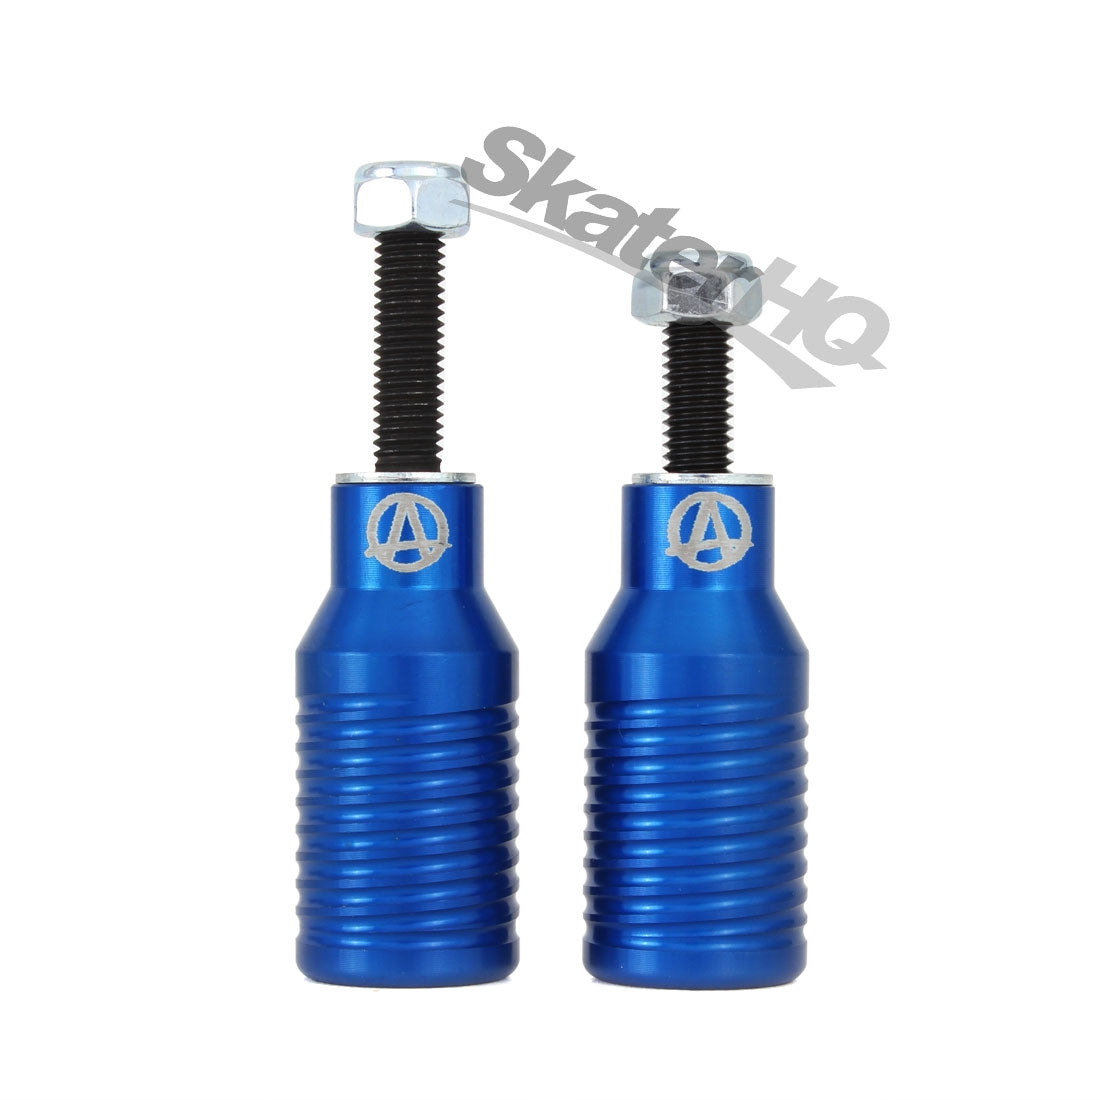 Apex Bowie Pegs 2pk - Blue Scooter Hardware and Parts